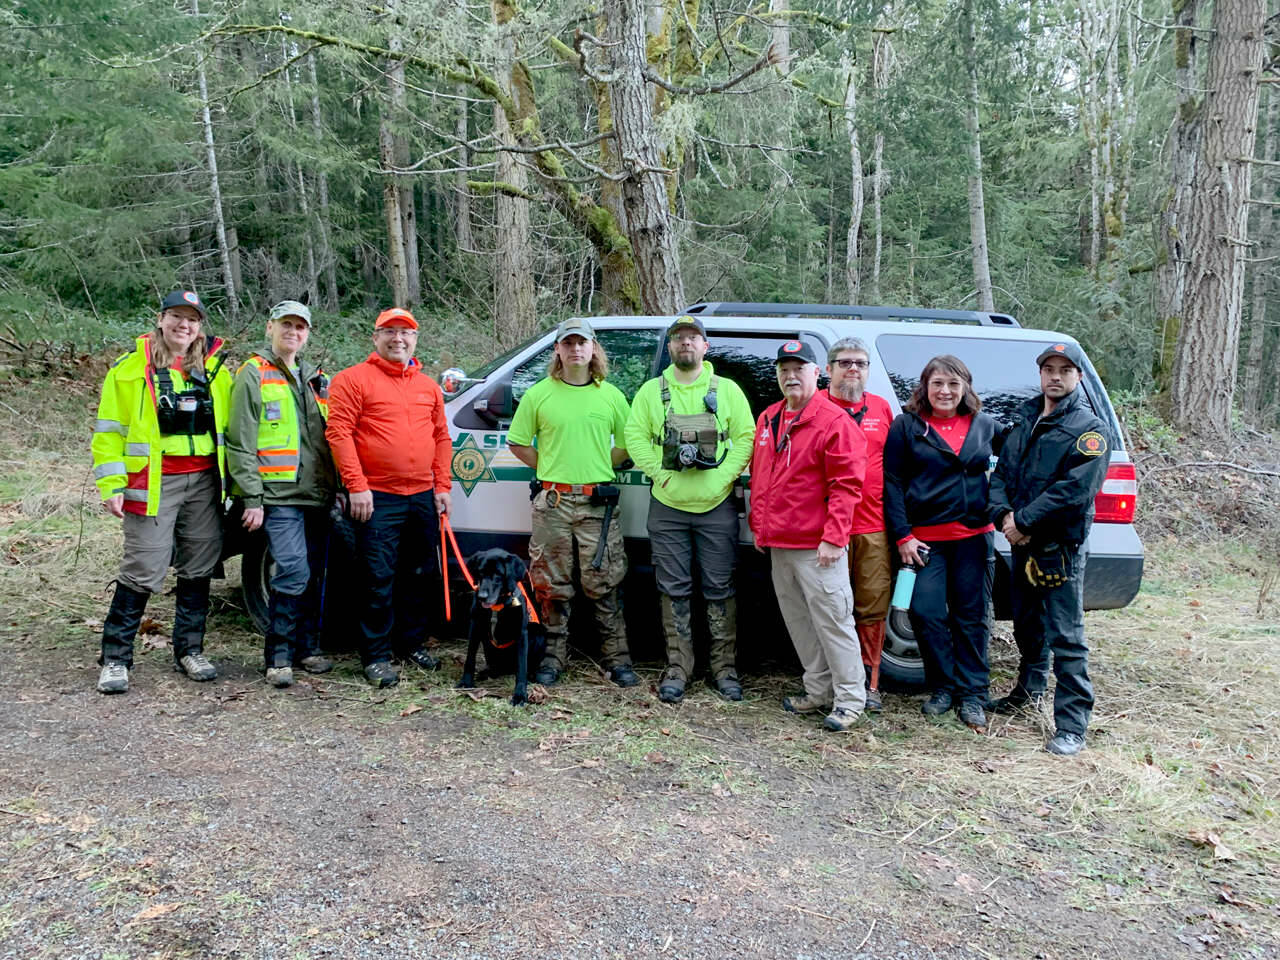 Searchers from Clallam and Mason counties who helped find Isaac Rivas on Saturday include, from left, Emily Last, T. Kenner, Chris Terpstra with his K-9 partner Makalu, Xenos Myers, Andrew Myers, Terry Shultz, Kurt Engel, Emma Janssen and Matt Aston. (Clallam County Sheriff’s Office)